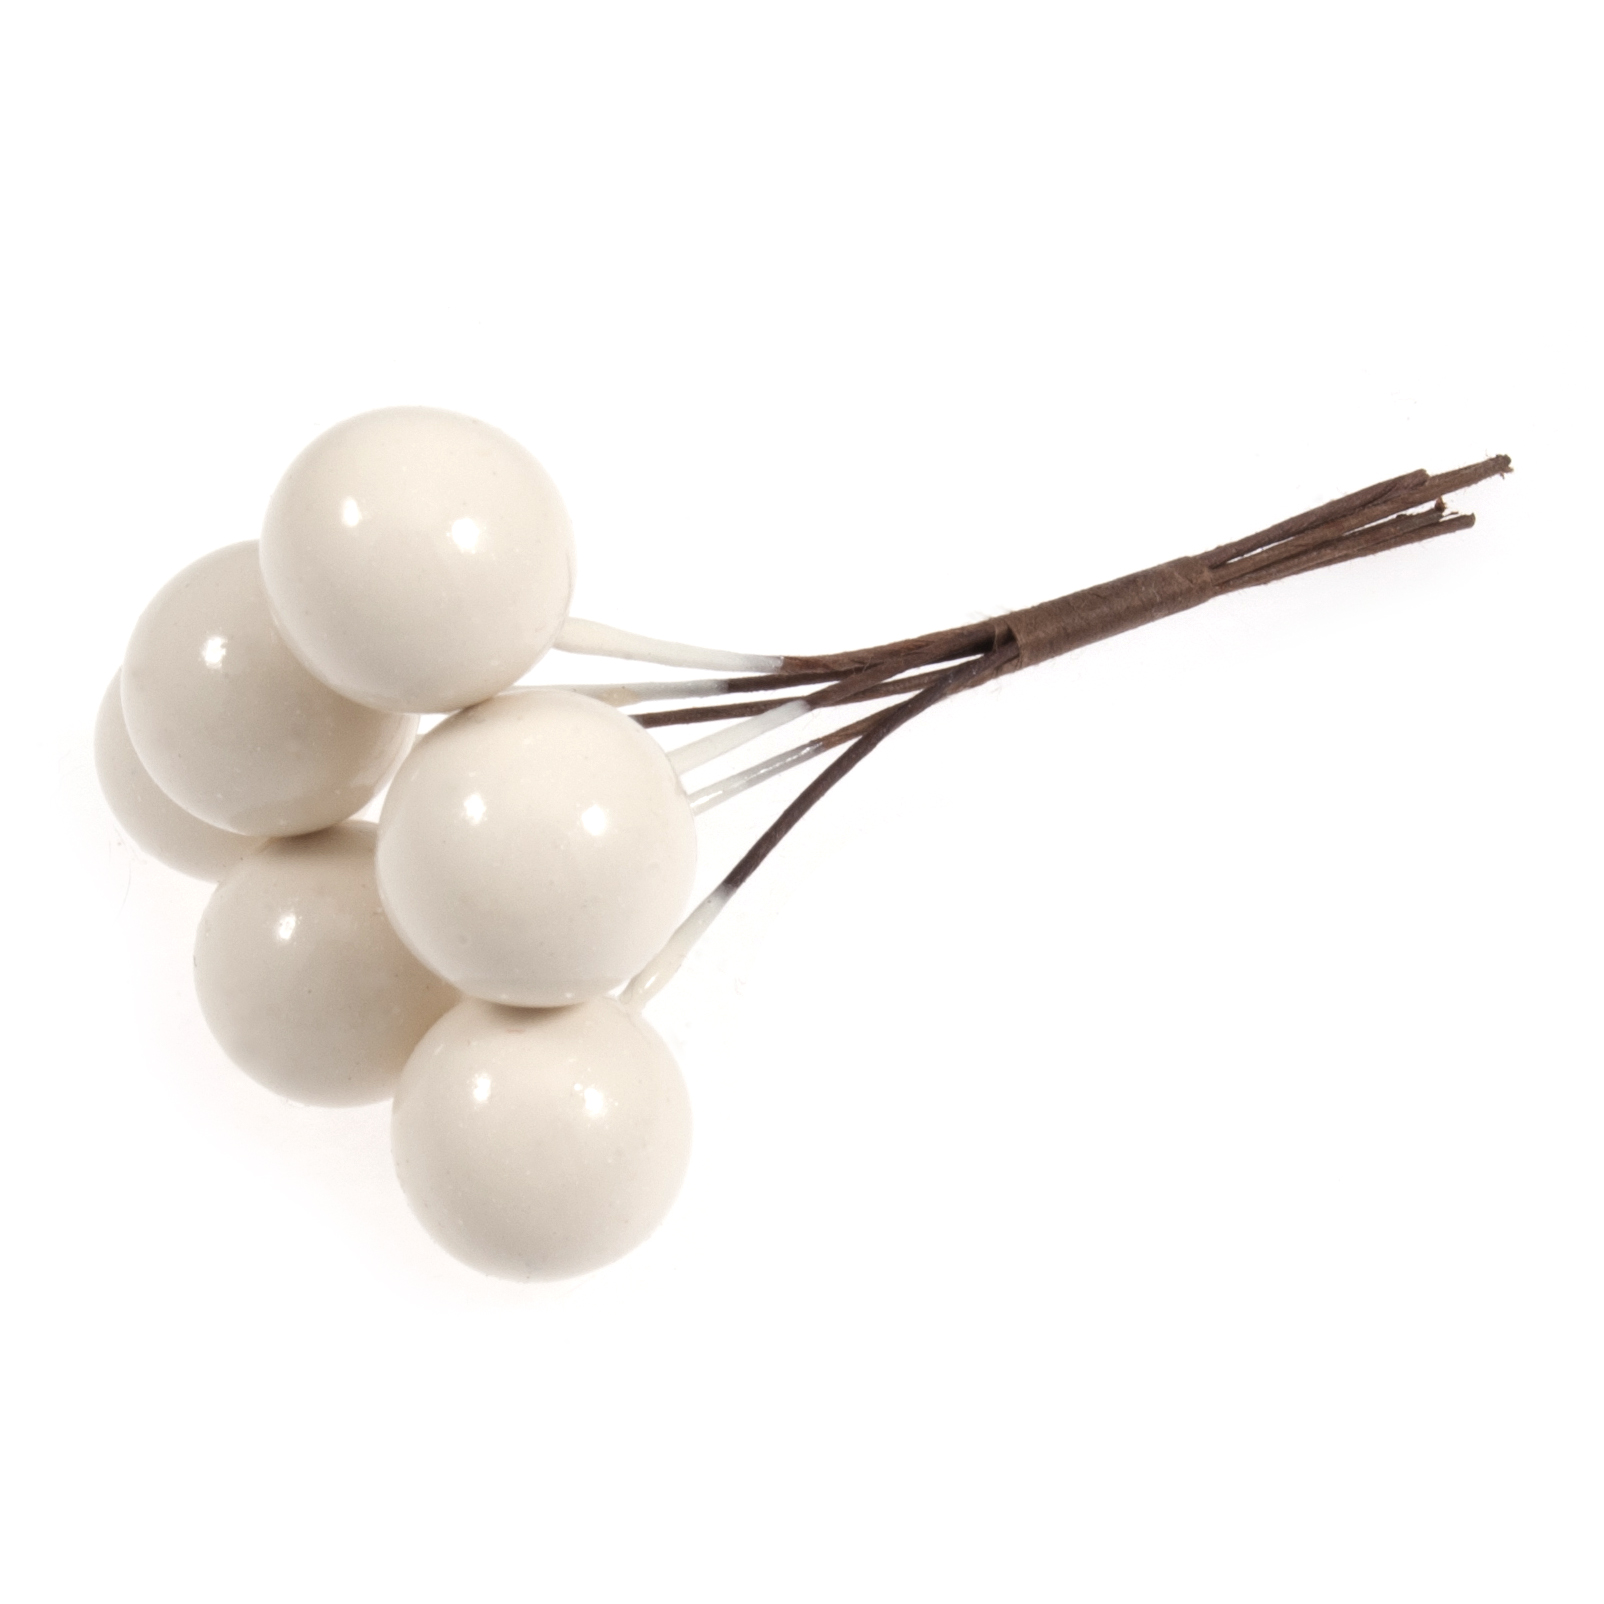 Picture of Berries: Medium 15mm: 6 x Bunches of 6 Stems: White